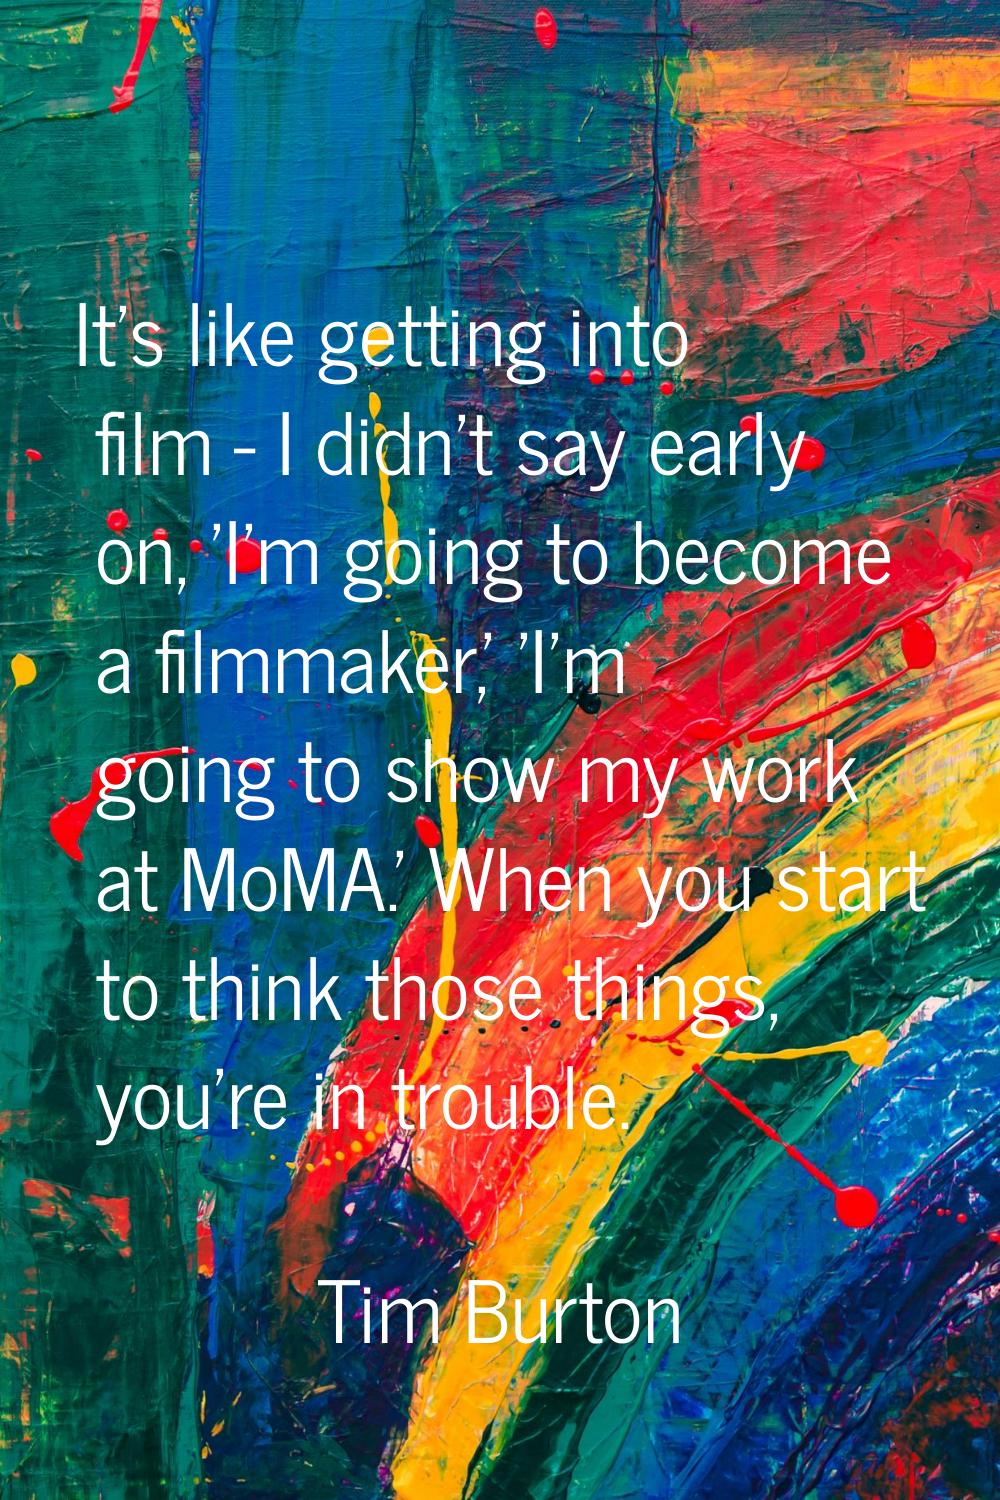 It's like getting into film - I didn't say early on, 'I'm going to become a filmmaker,' 'I'm going 